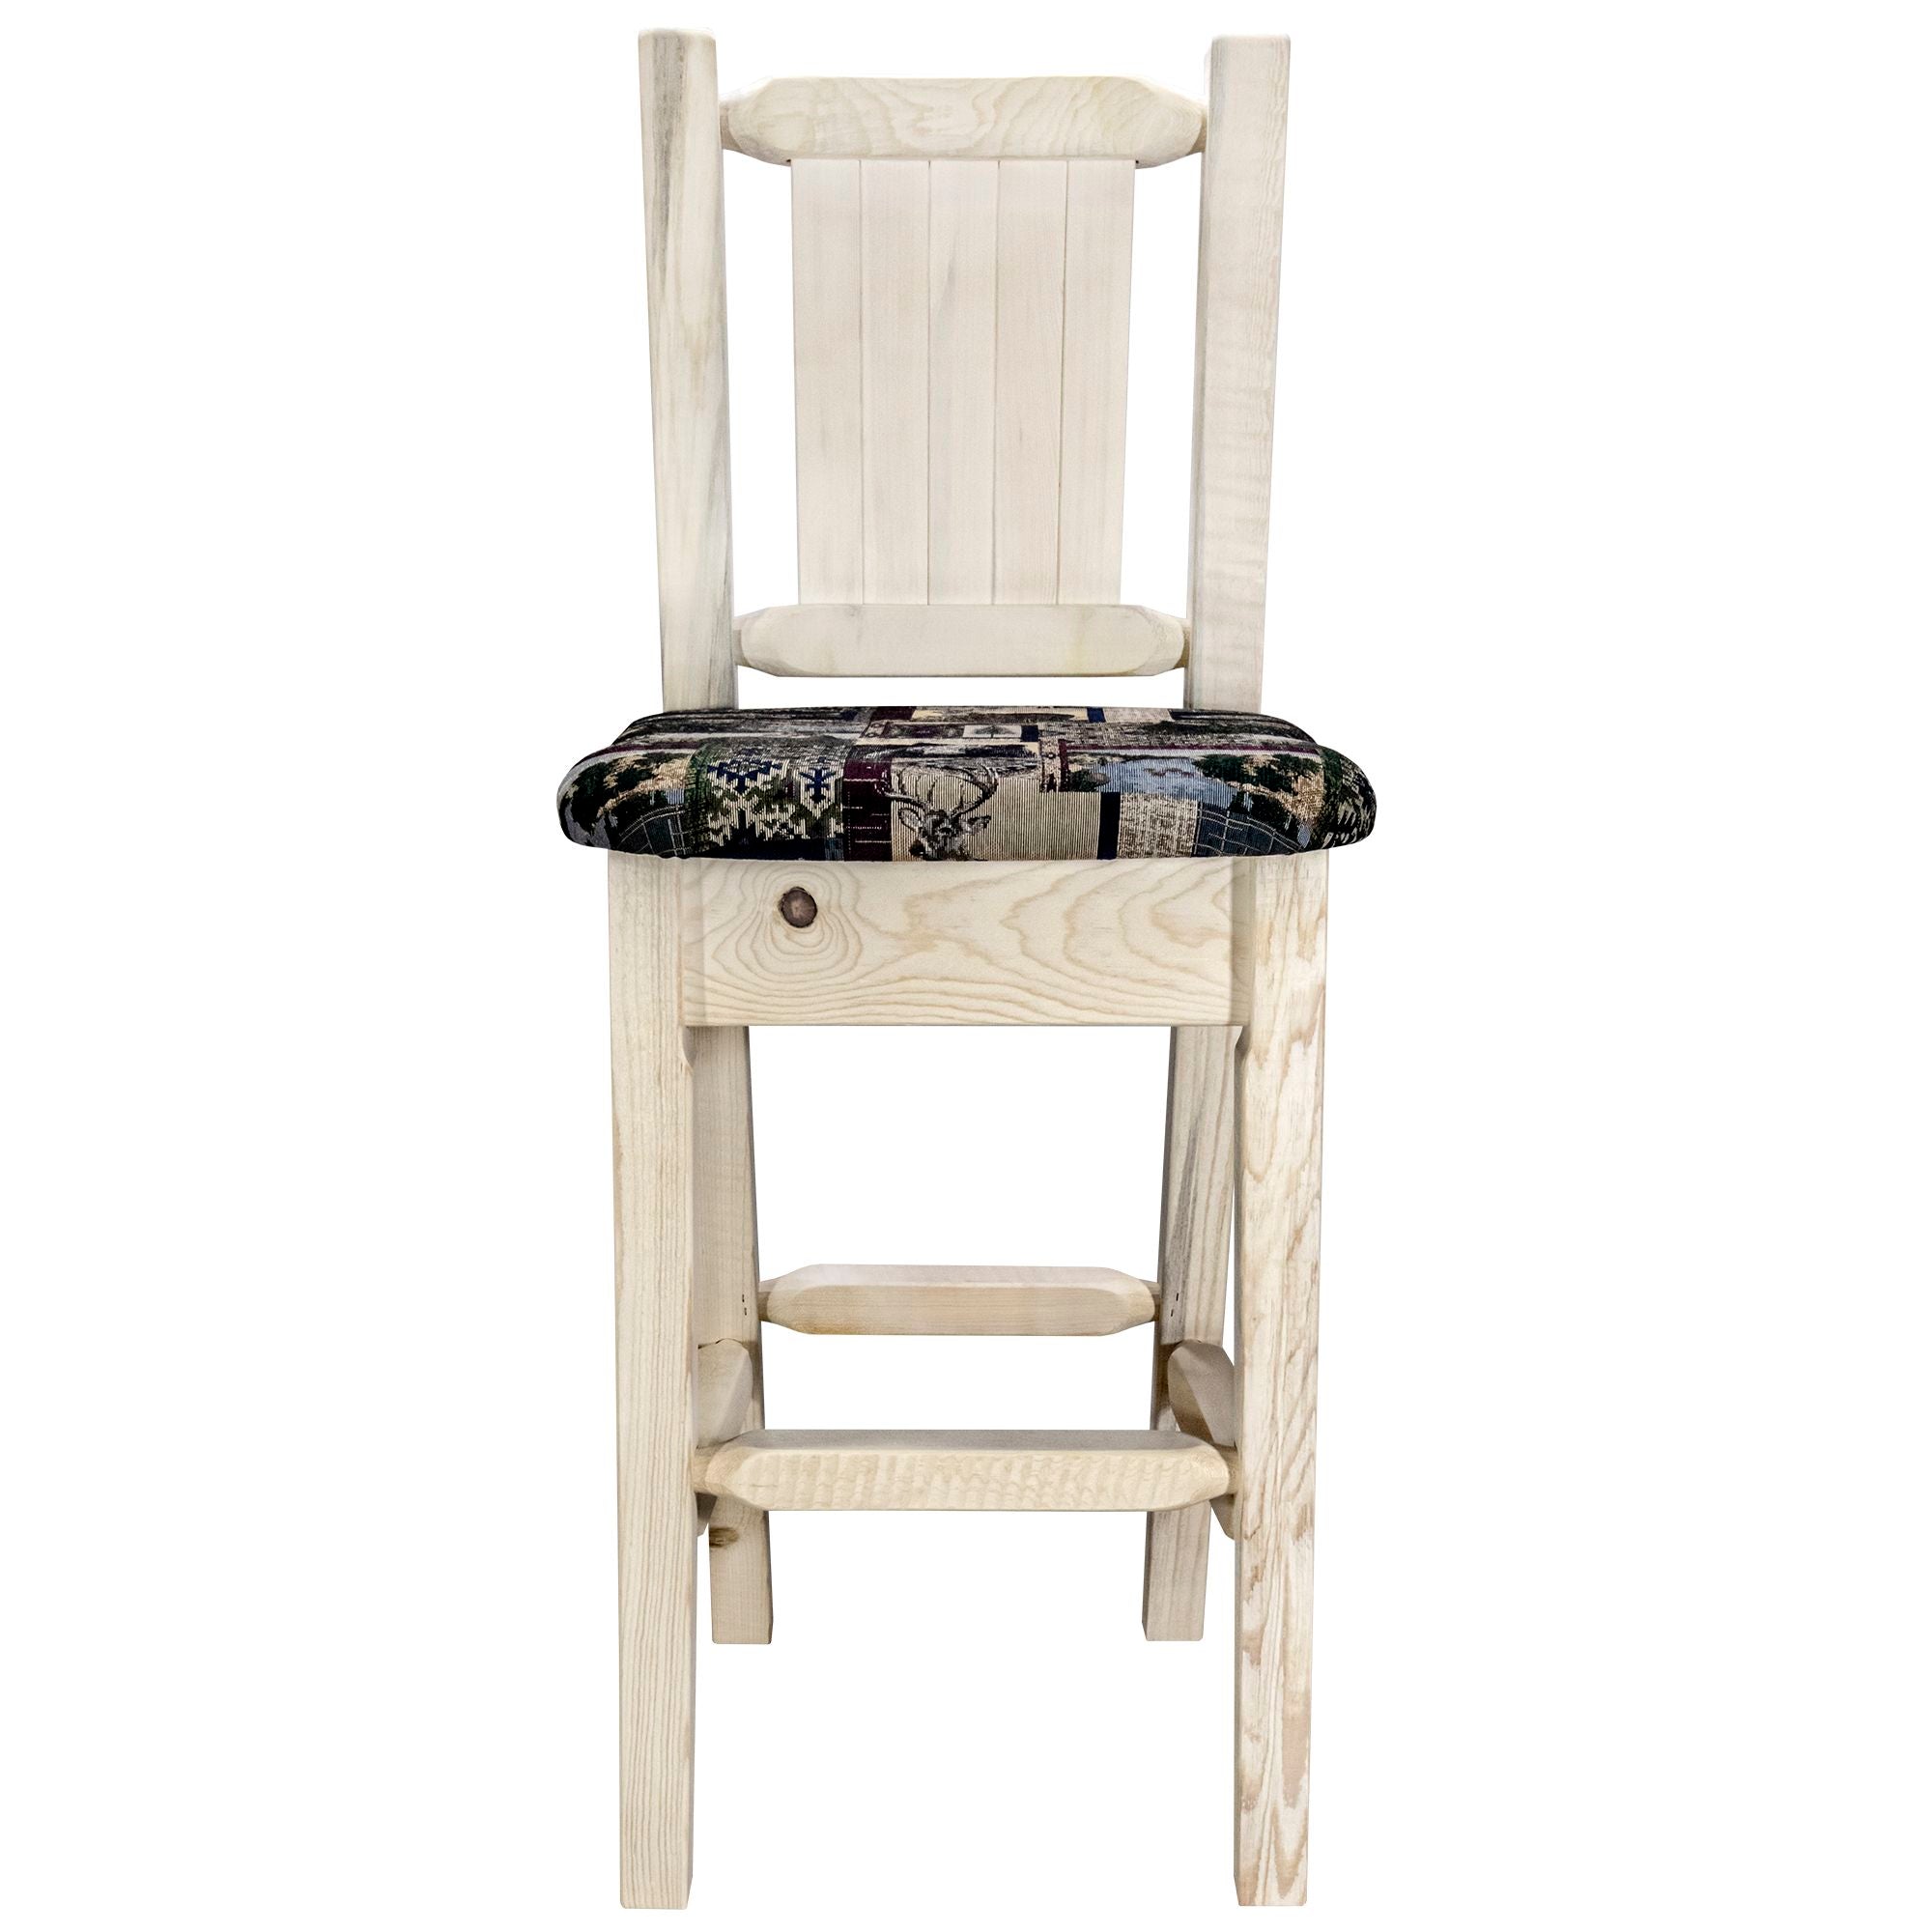 Montana Woodworks Homestead Collection Barstool w/ Back - Woodland Upholstery, w/ Laser Engraved Clear Lacquer Finish